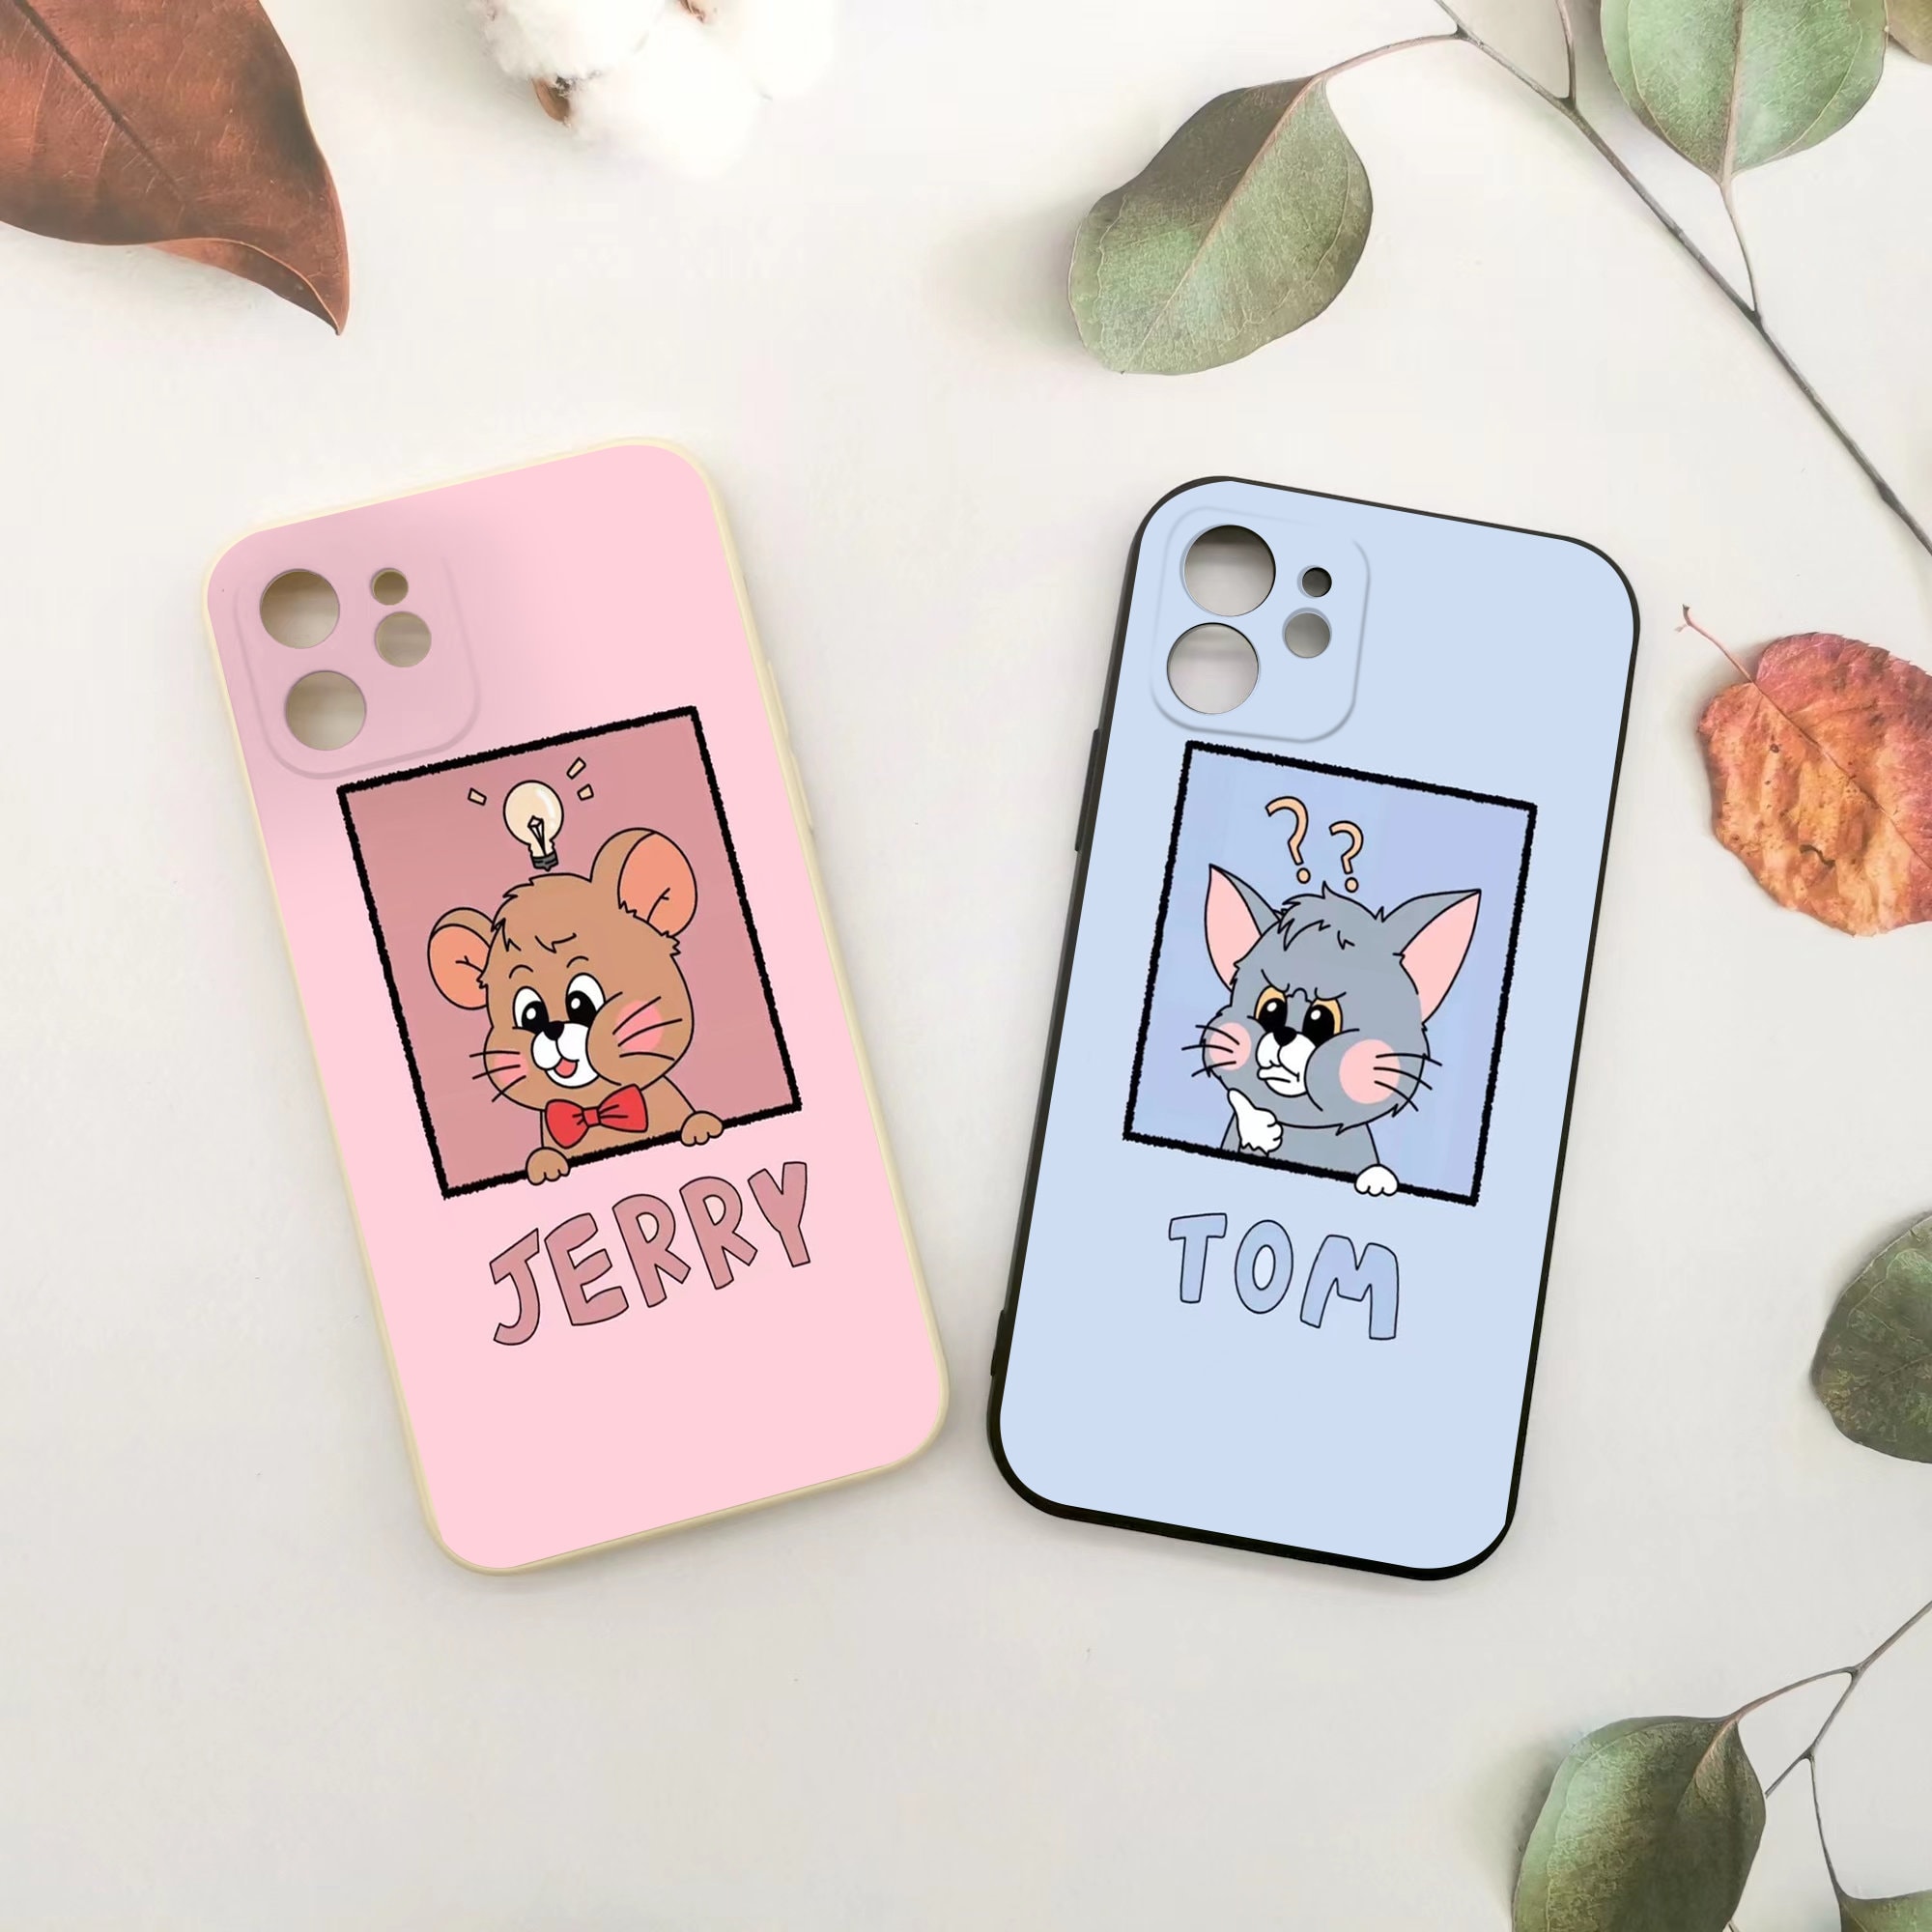 Discover Cartoon Tom and Jerry Couple Phone Case Cover For iPhone 13/12/11 Pro Max, Xs, 7, 8